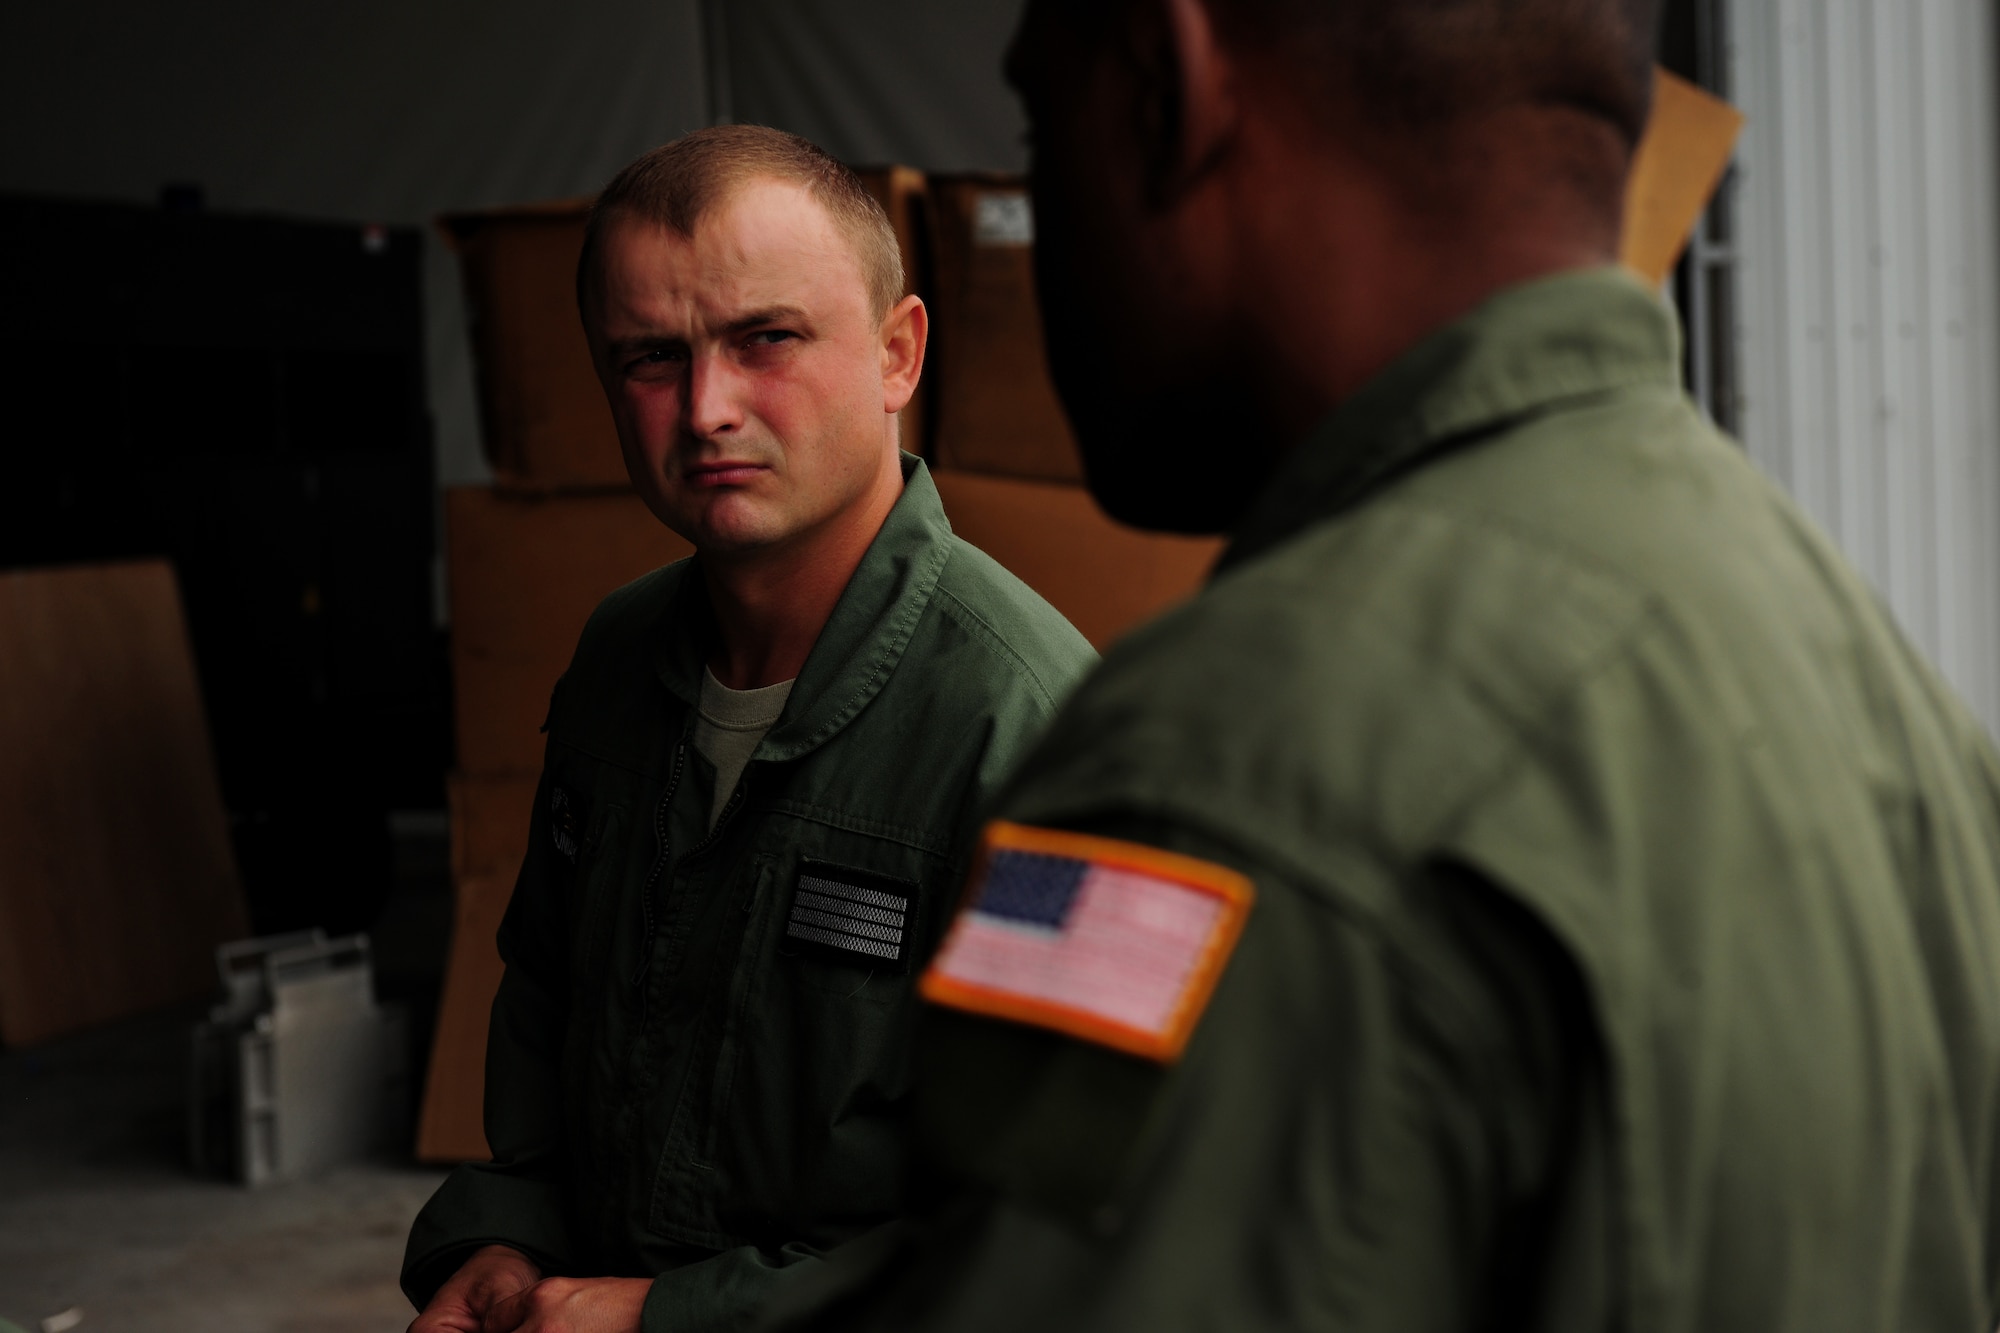 Polish air force Sgt. Zbigniew Krajniak  discusses mass container delivery airdrop operations with U.S. Air Force Master Sgt. Chris Minnifield Aug. 11, 2014, at Powidz Air Base, Poland. The discussion served as refresher training for Polish forces preparing to deliver equipment and supplies to Iraq.  Krajniak is a 33rd Transportation Air Base loadmaster and Minnifield is a 37th Airlift Squadron loadmaster. (U.S. Air Force photo/Staff Sgt. Jarad A. Denton)